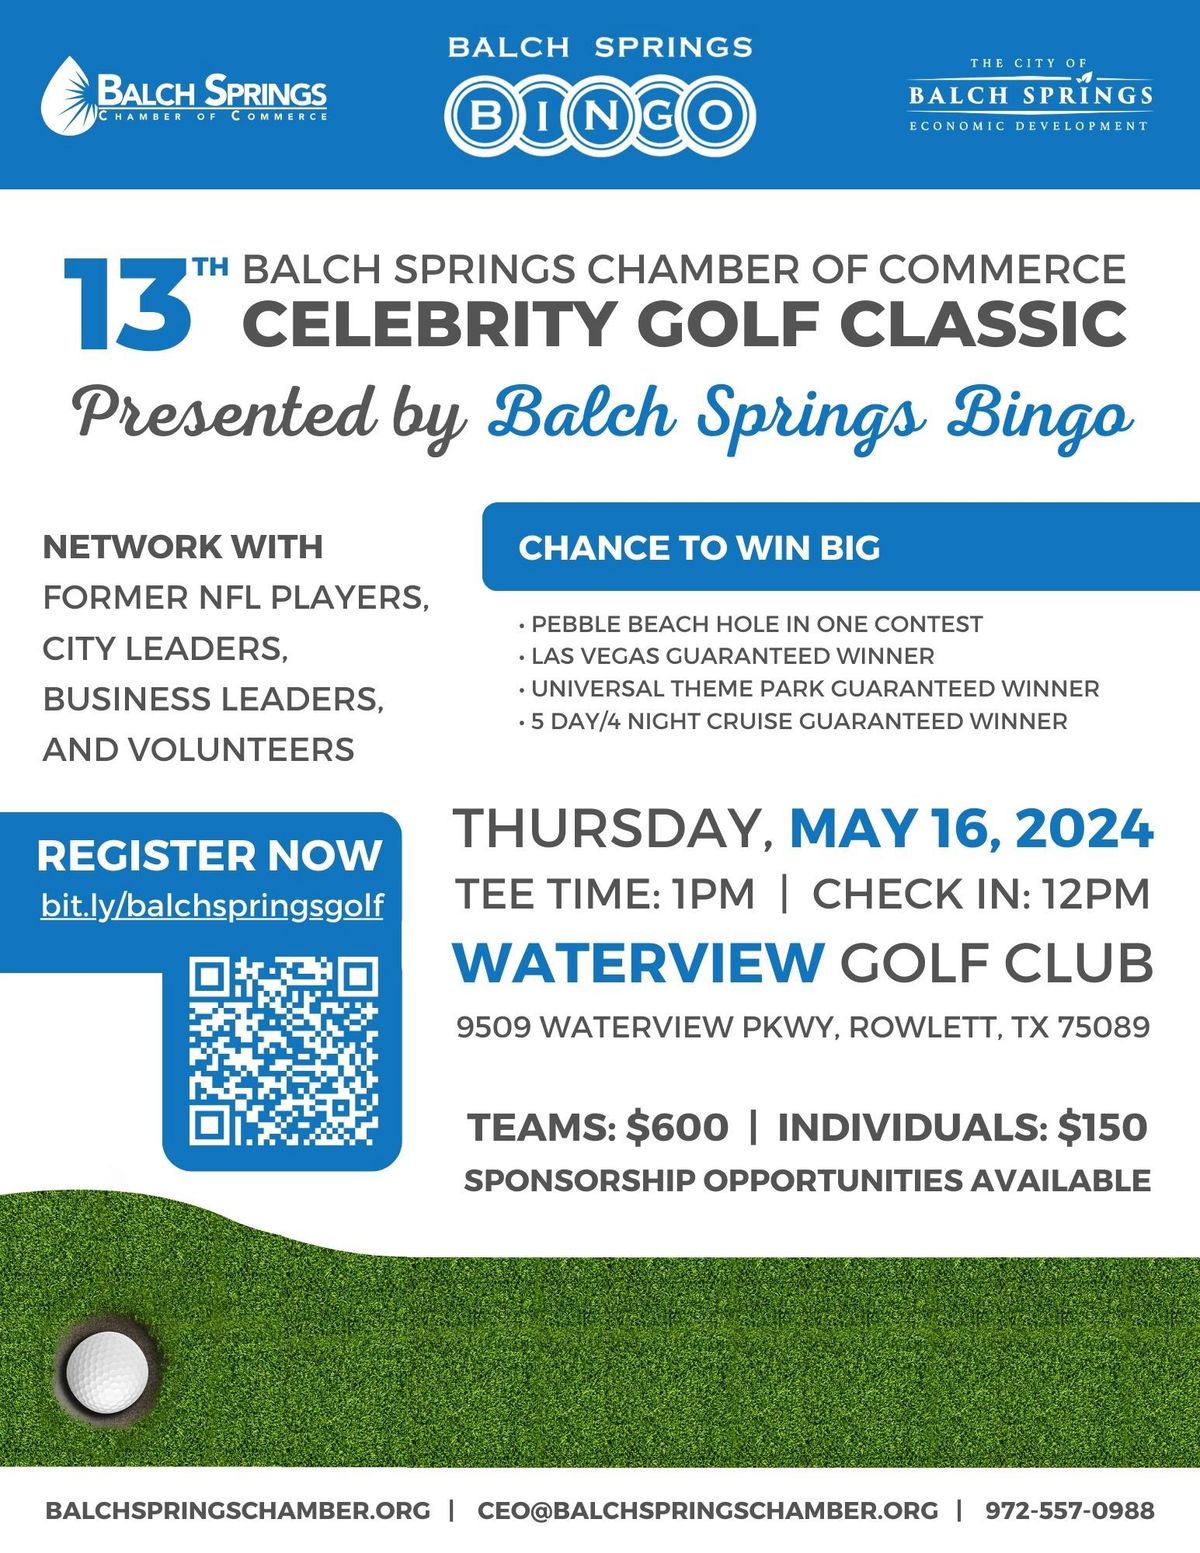  13th Balch Springs Chamber of Commerce Celebrity Golf Classic